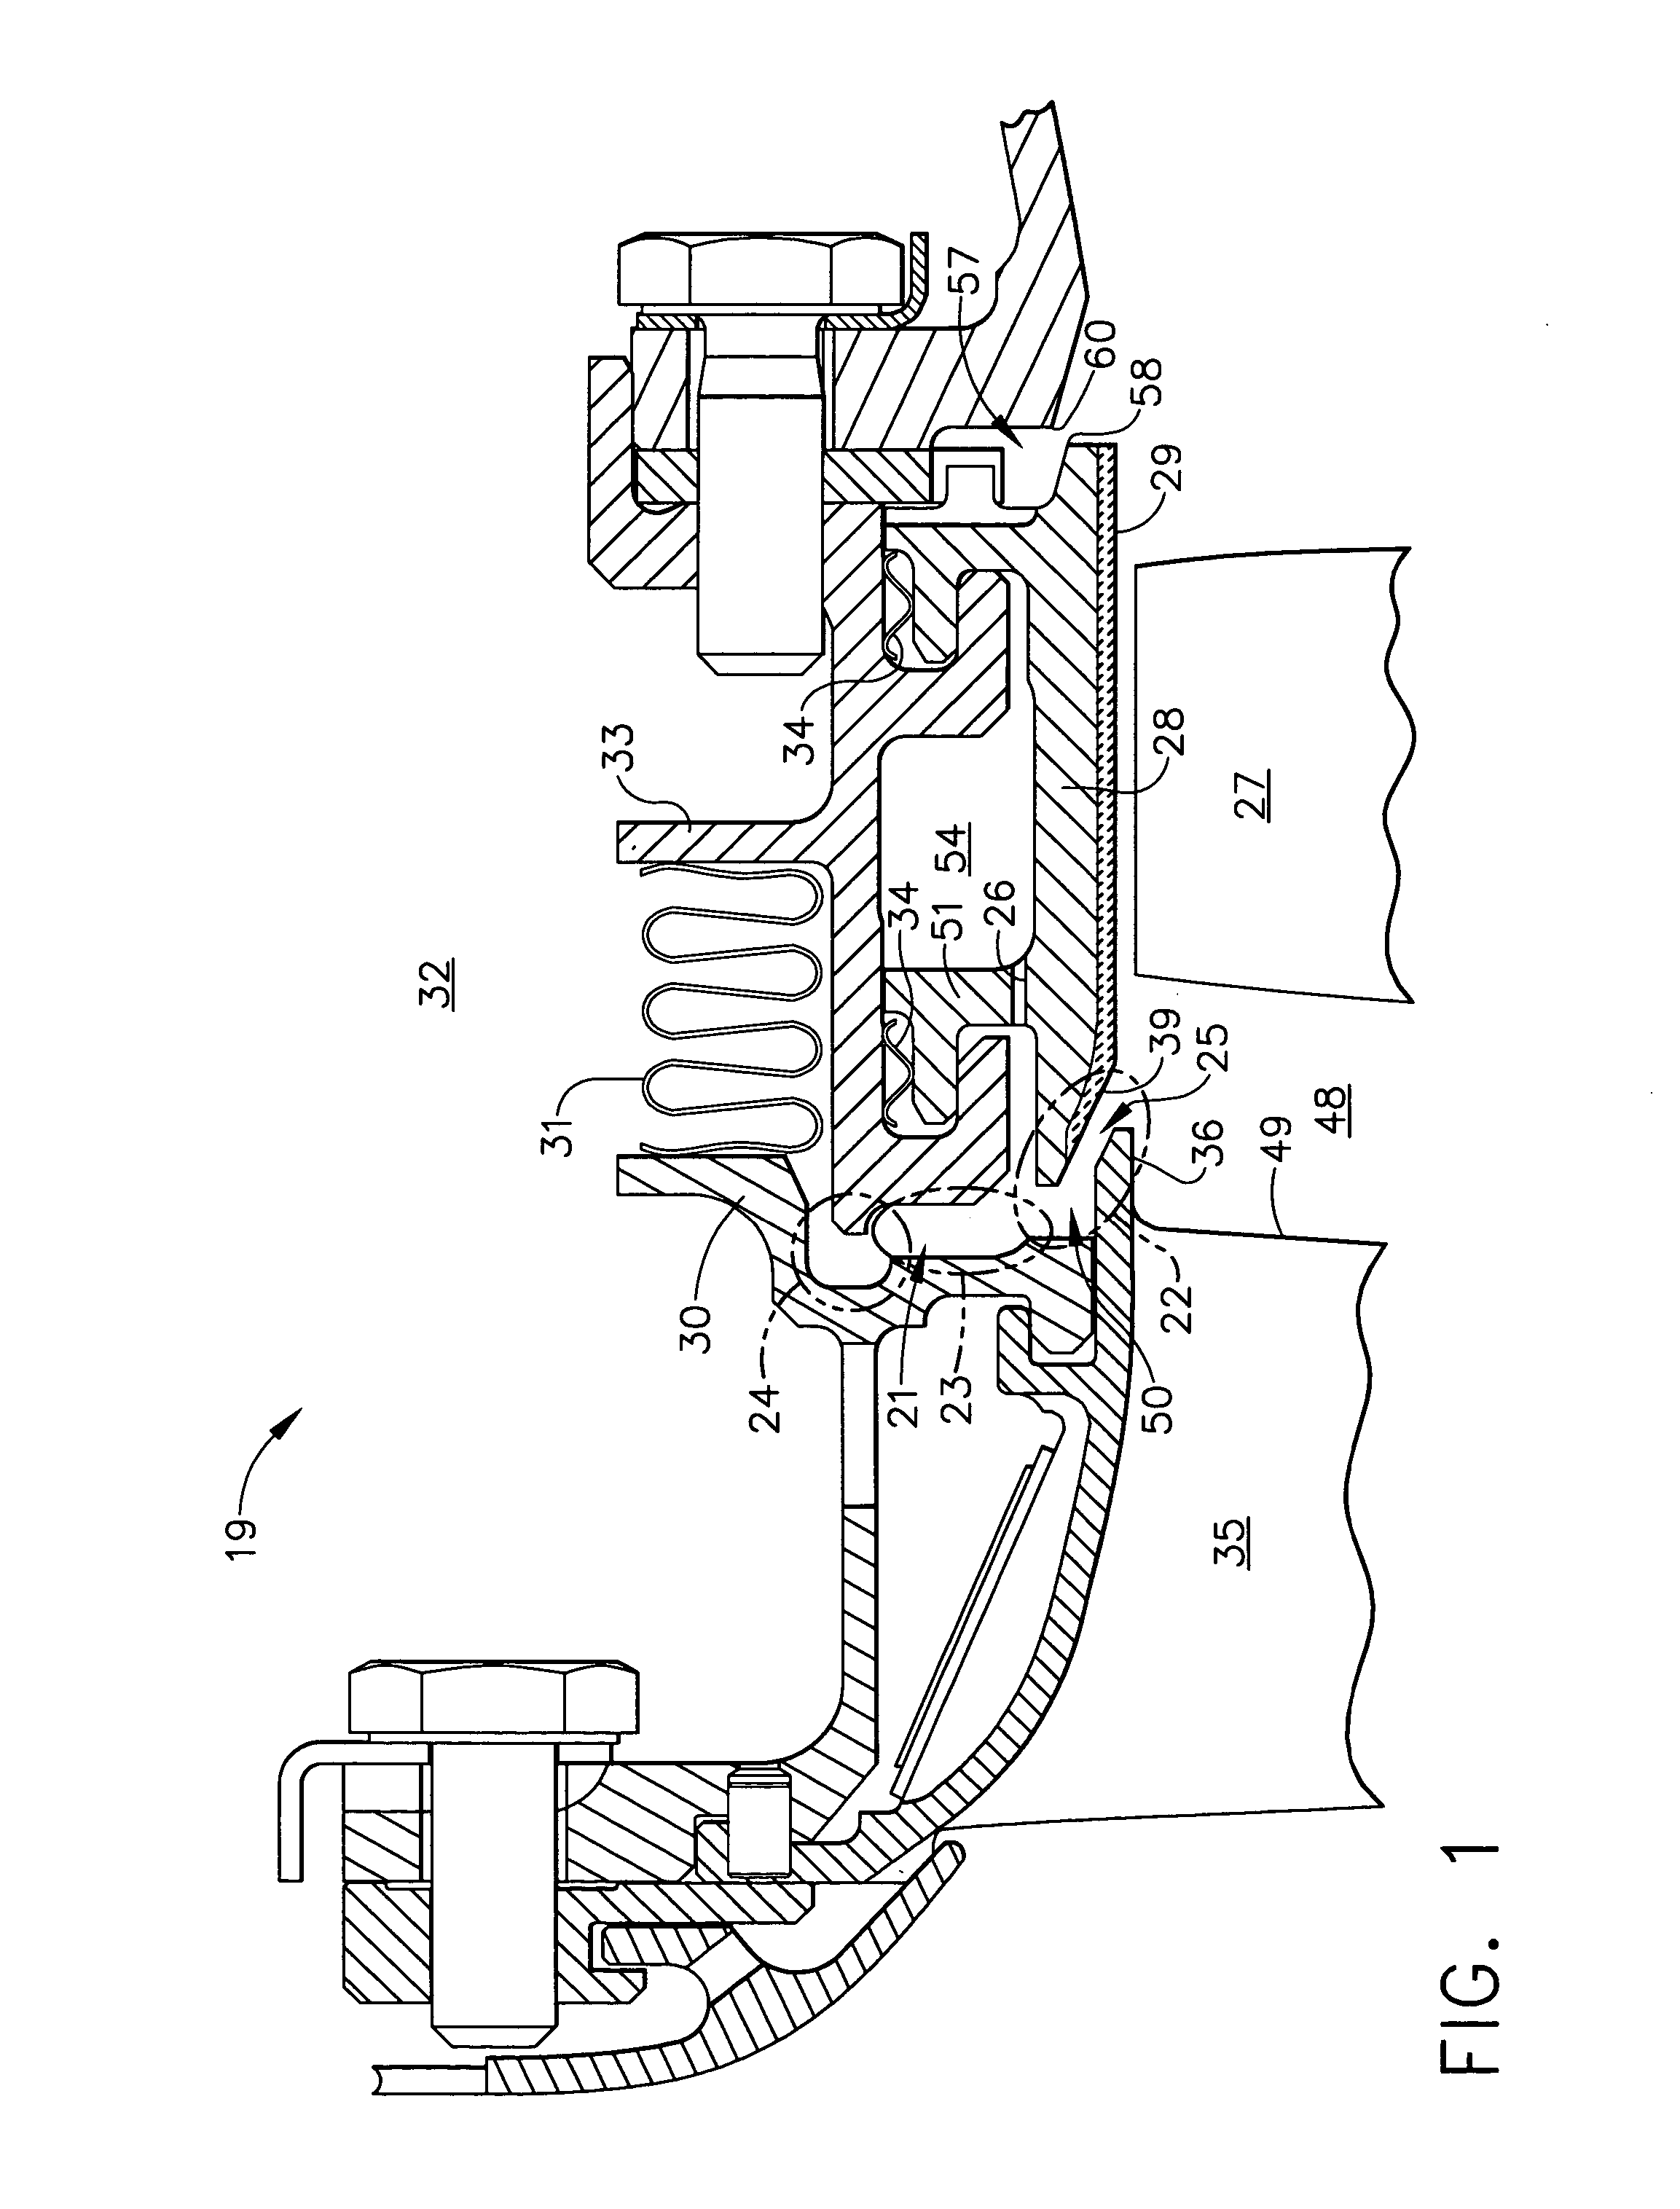 Gas turbine cooled shroud assembly with hot gas ingestion suppression